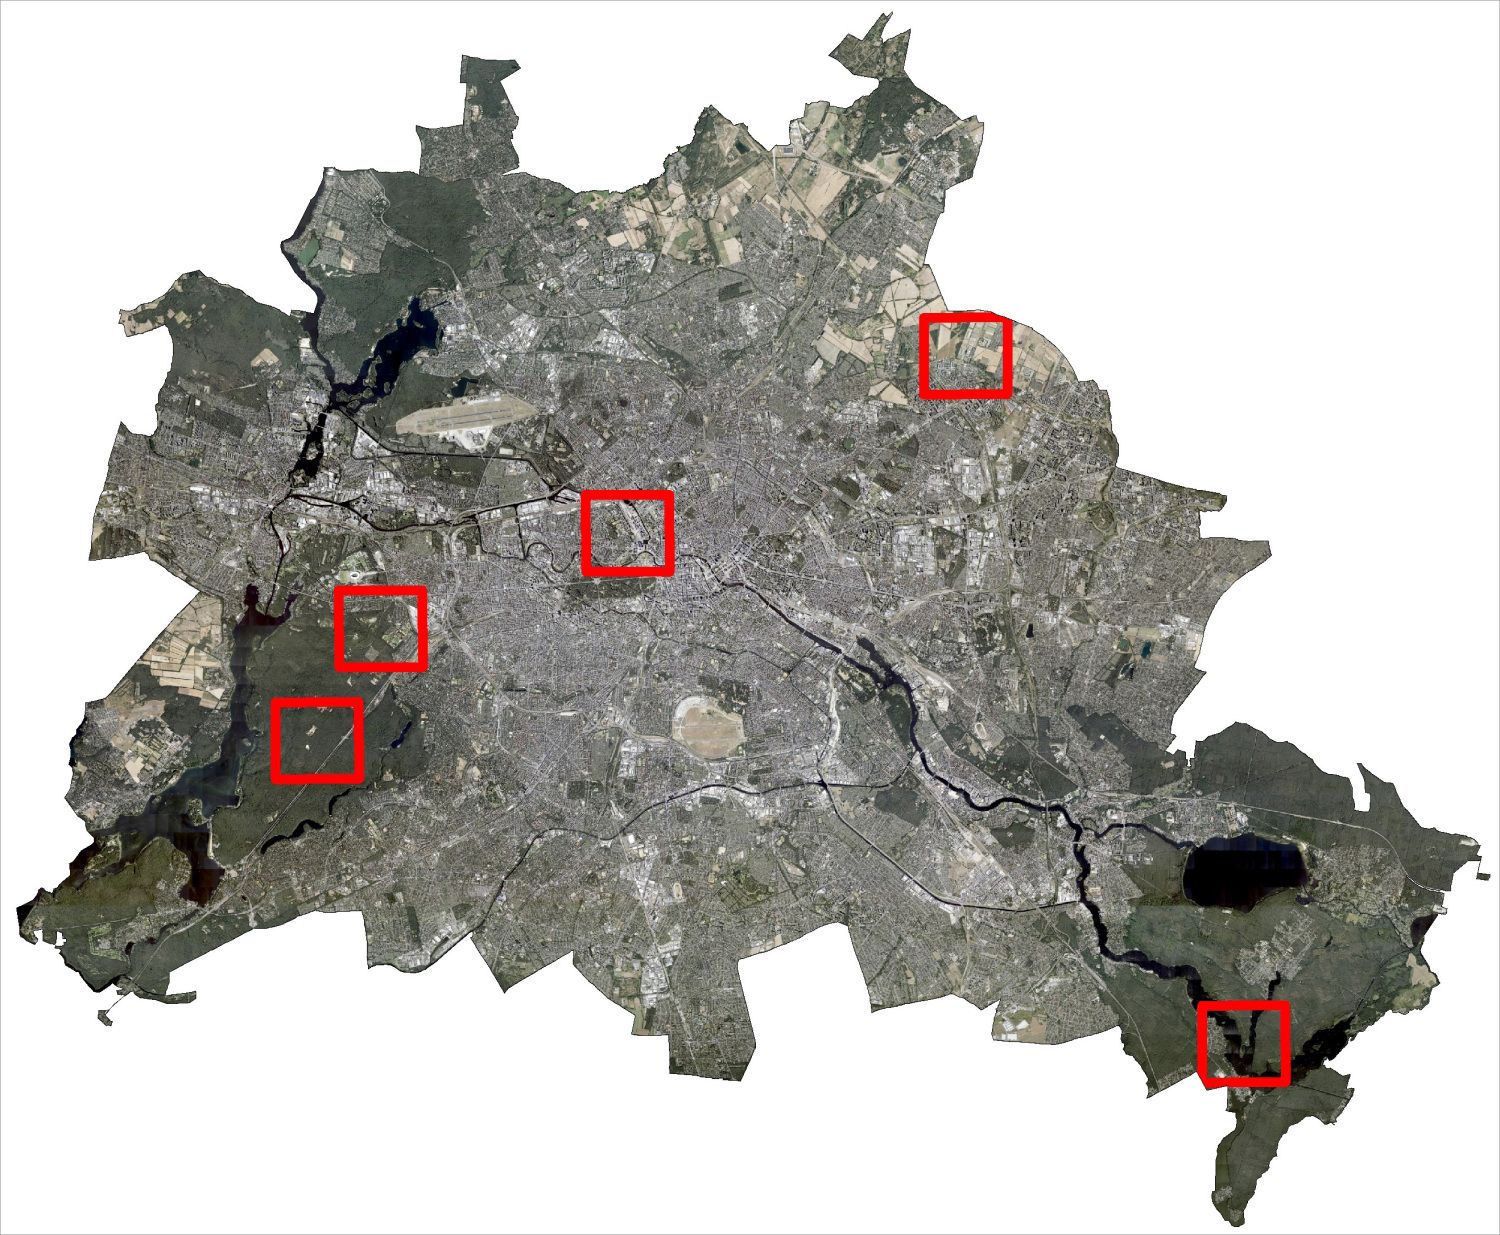 Enlarge photo: Fig. 5: Location of the sample areas used for method development, background: true orthophotos from 2020 